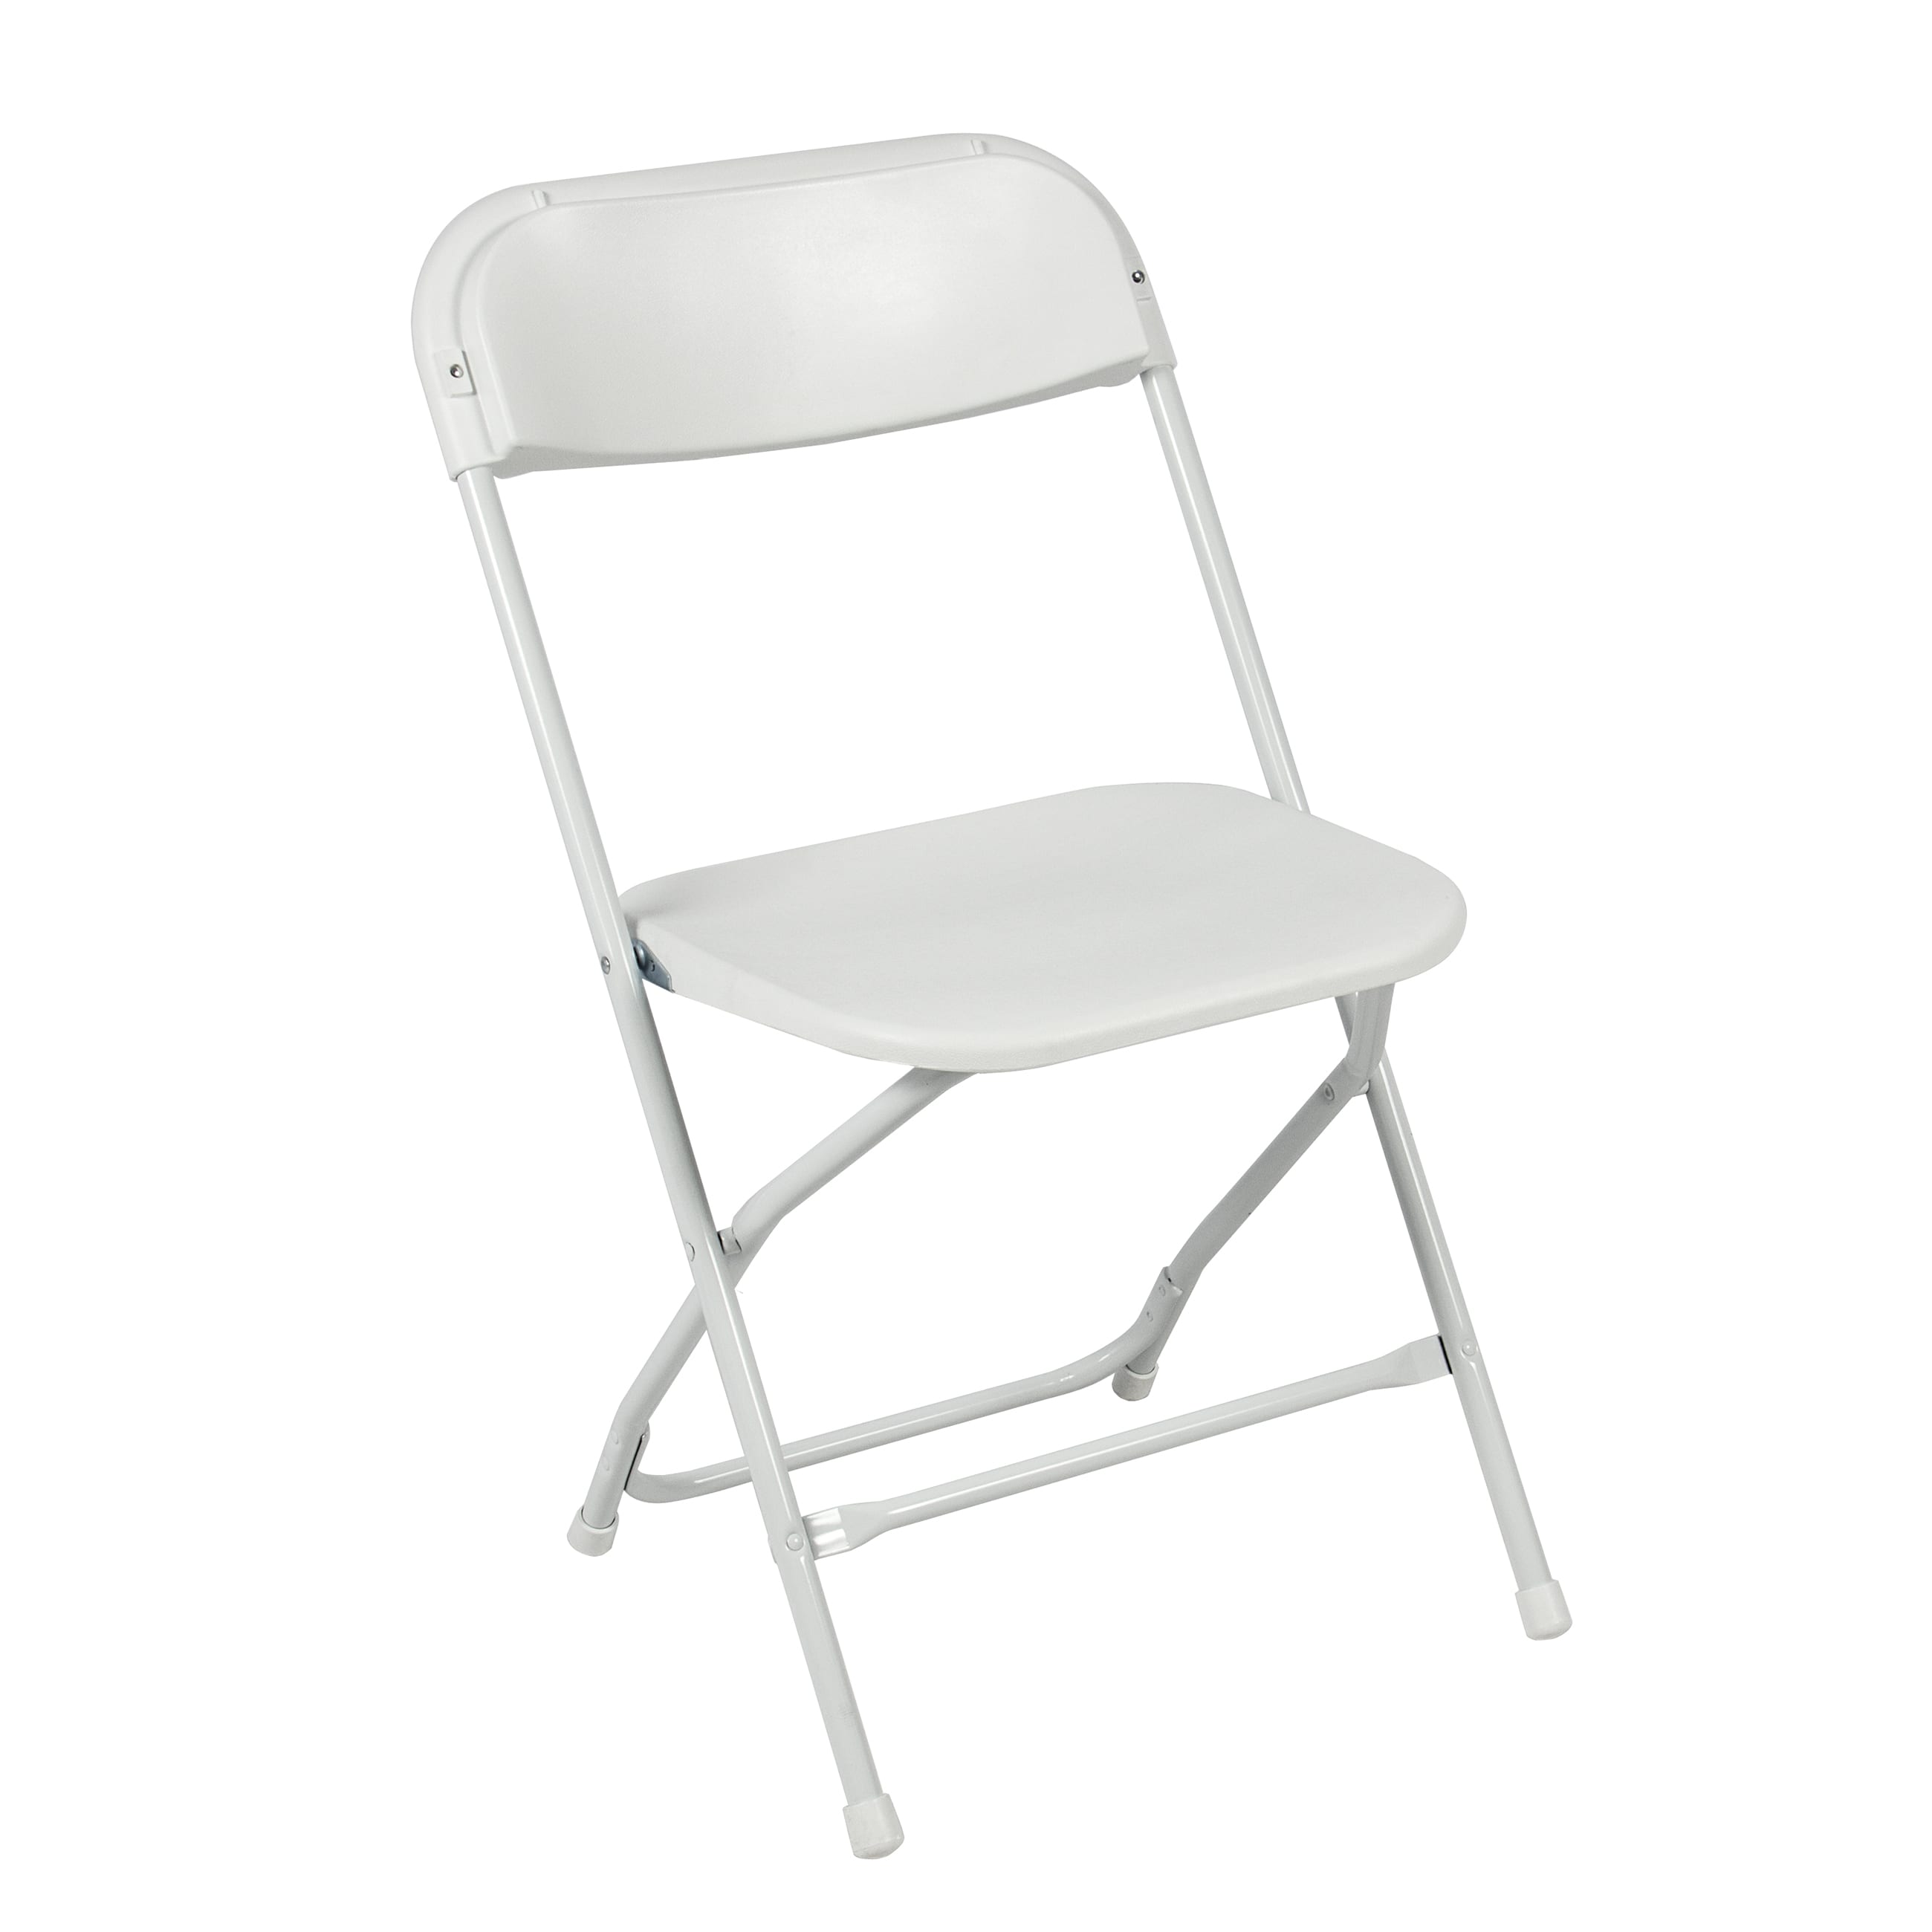 White metal chairs for rent in Los Angeles